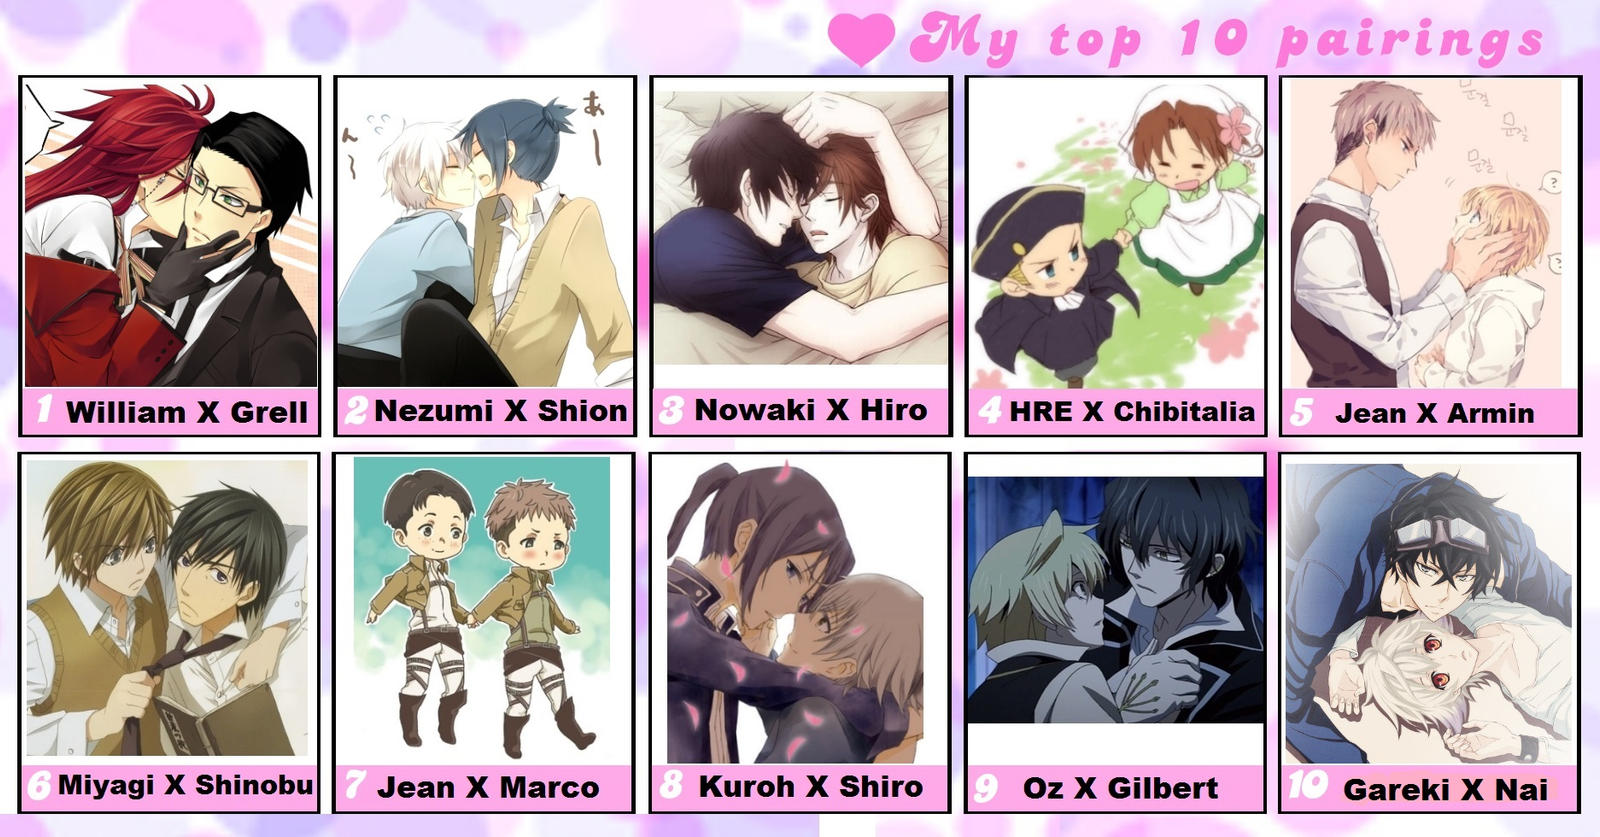 Favorites - What anime yaoi pairings do you like?, Page 4